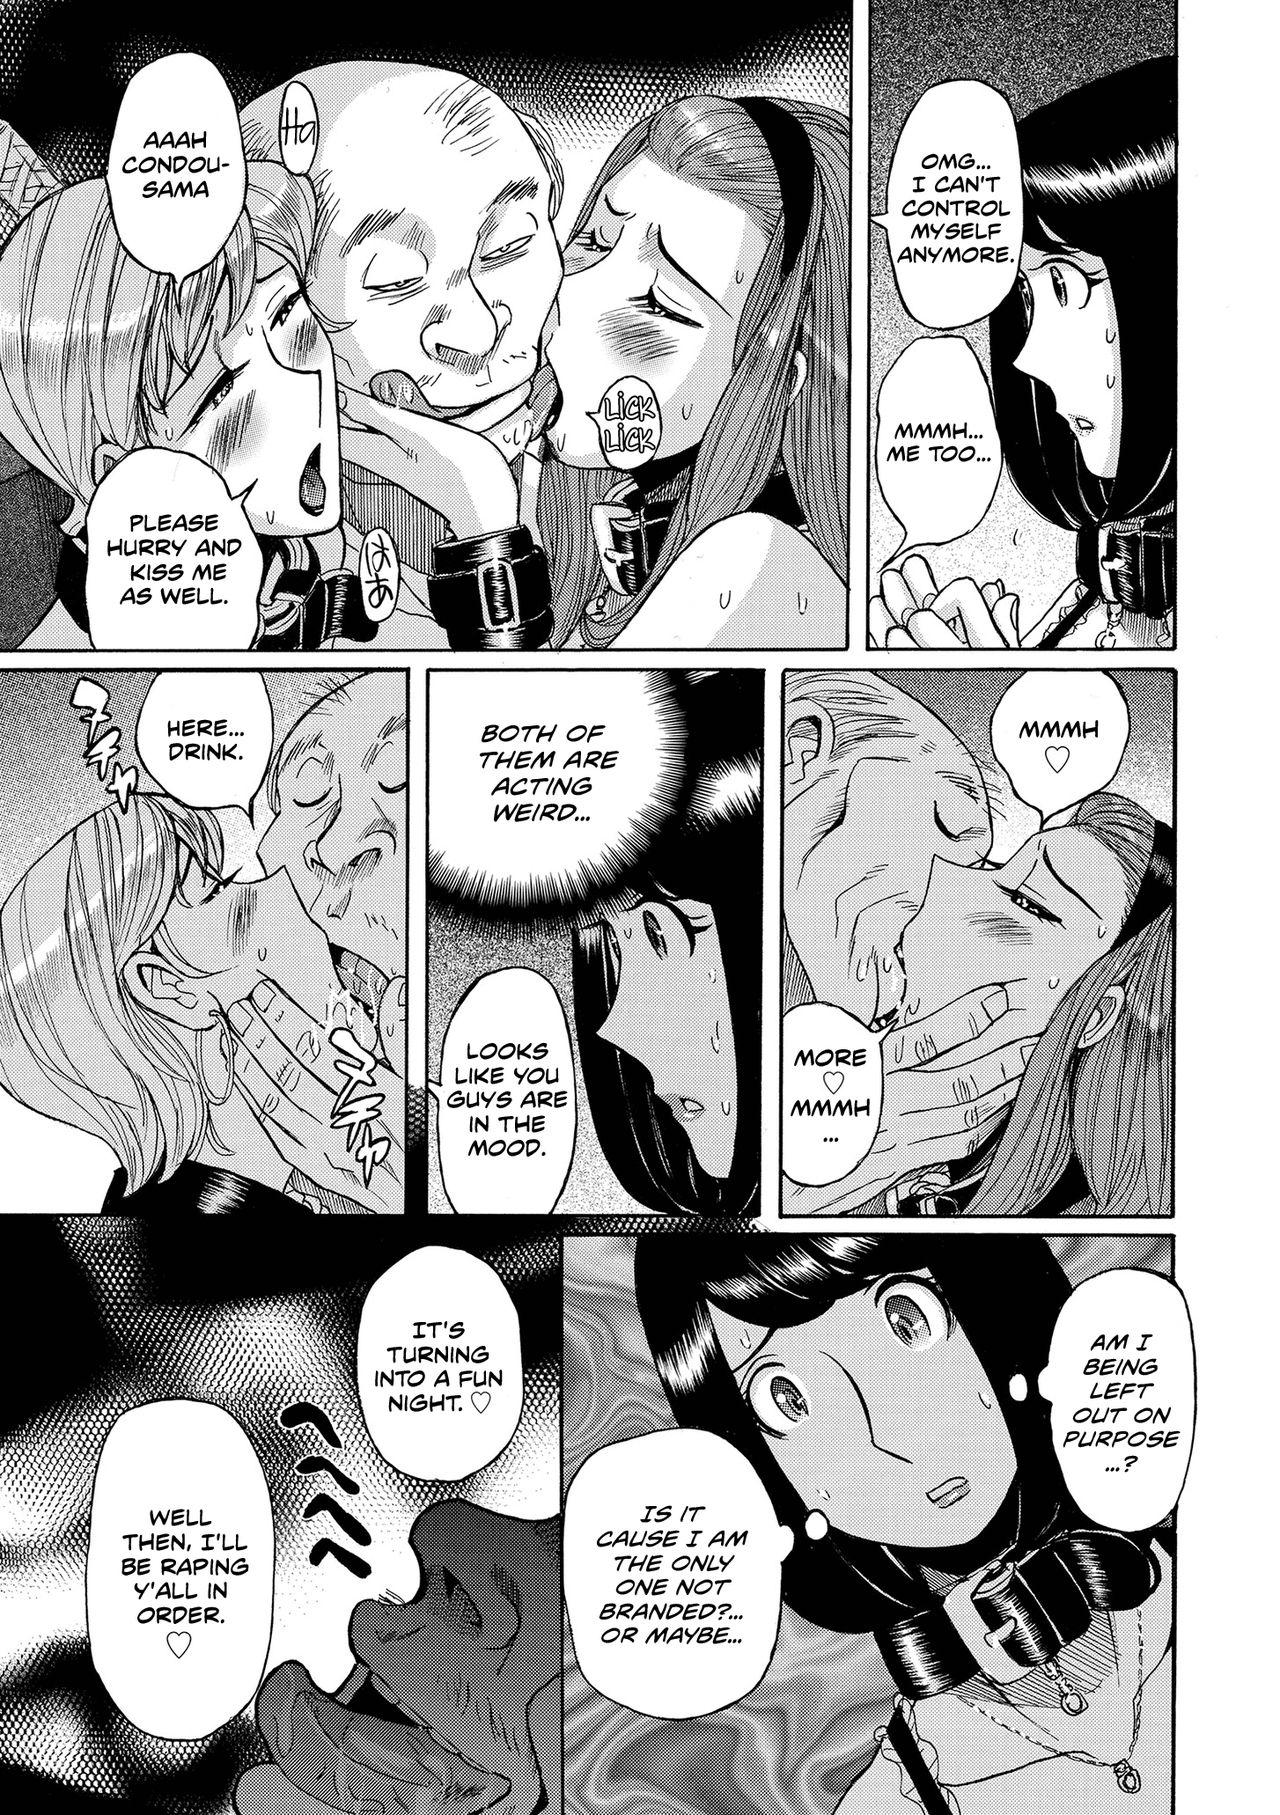 Rough Fucking Hiasobi Chuuhen | Playing With Fire - Part Three Guys - Page 7